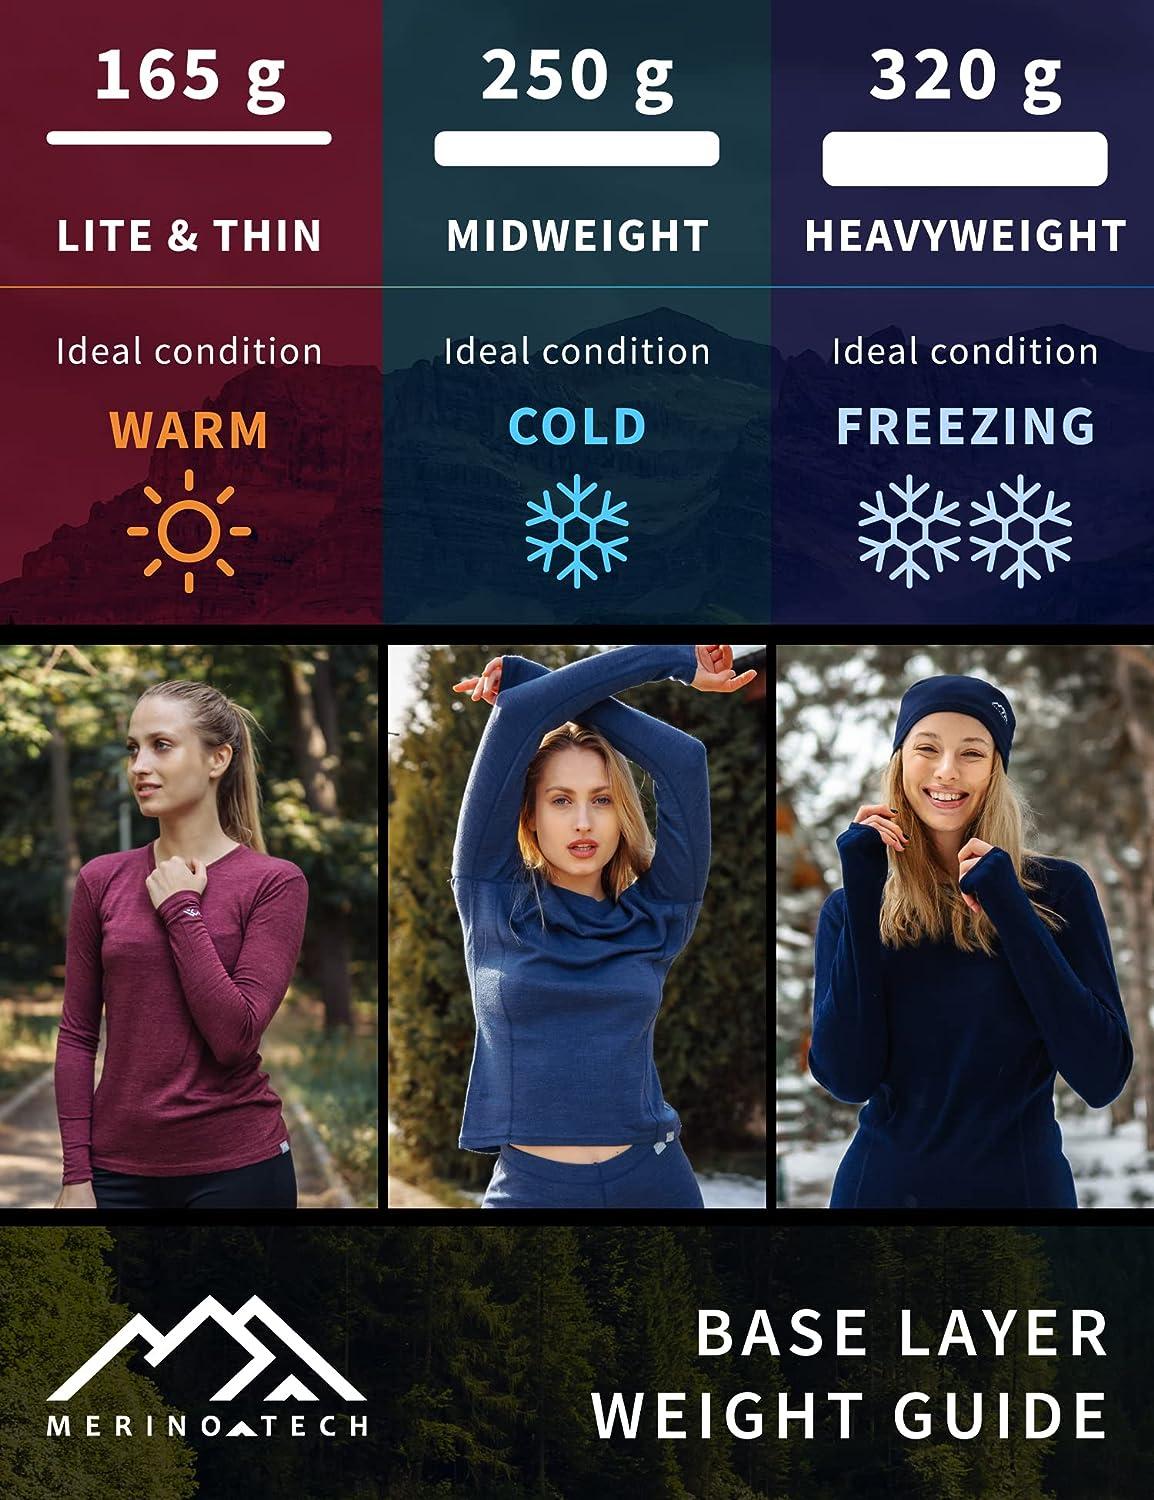 LASTING - producer of superfine MERINO WOOL base layer, clothes, socks